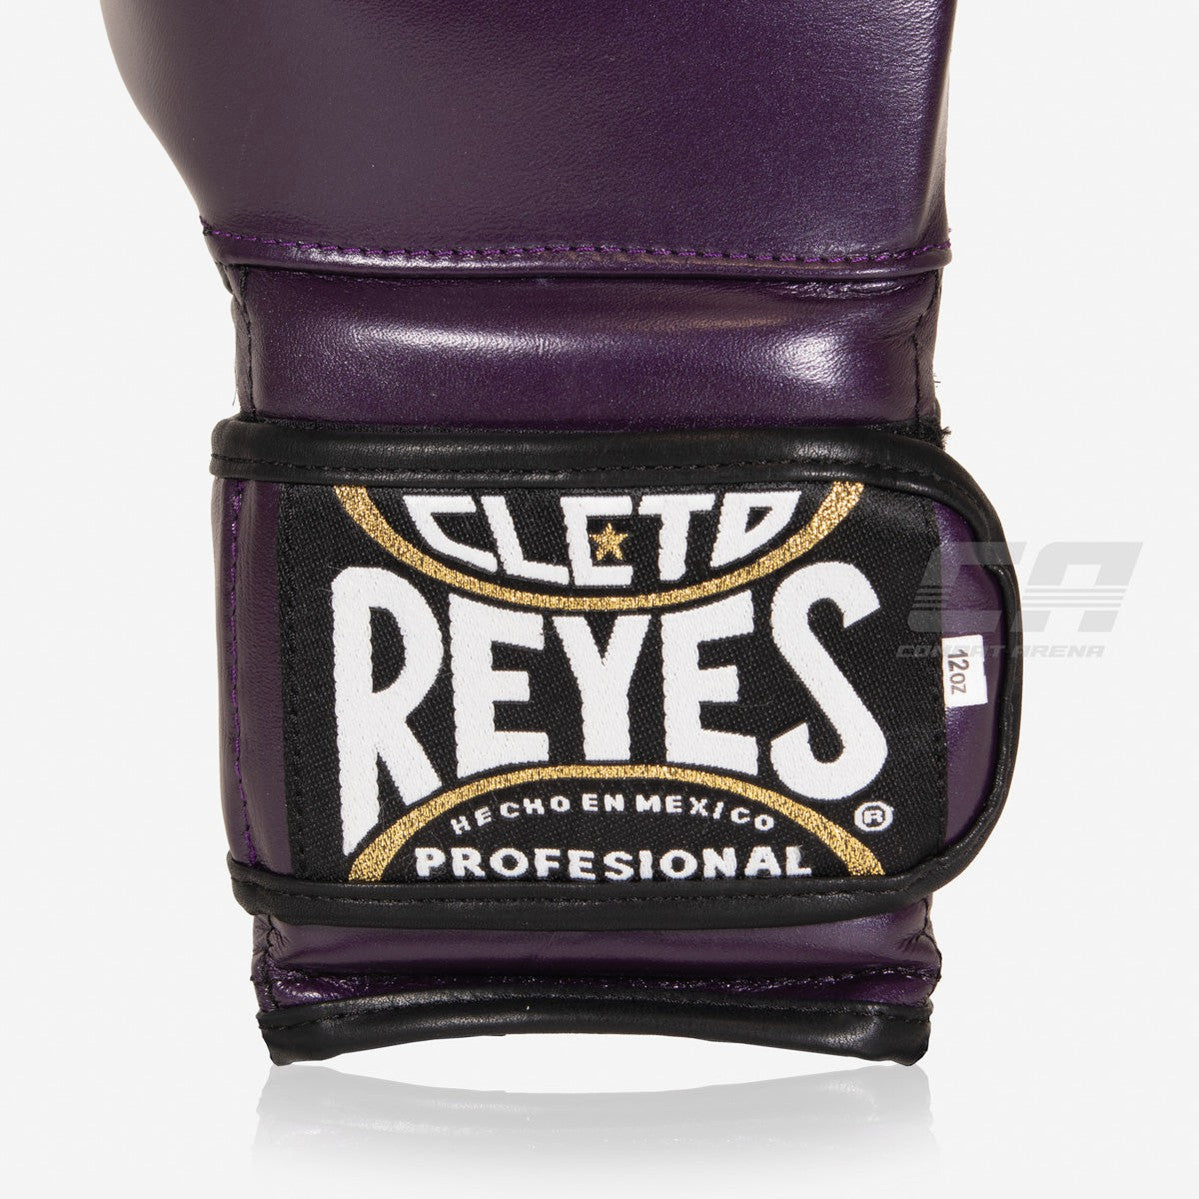 Boxing gloves Cleto Reyes Sparring CE6 Purple